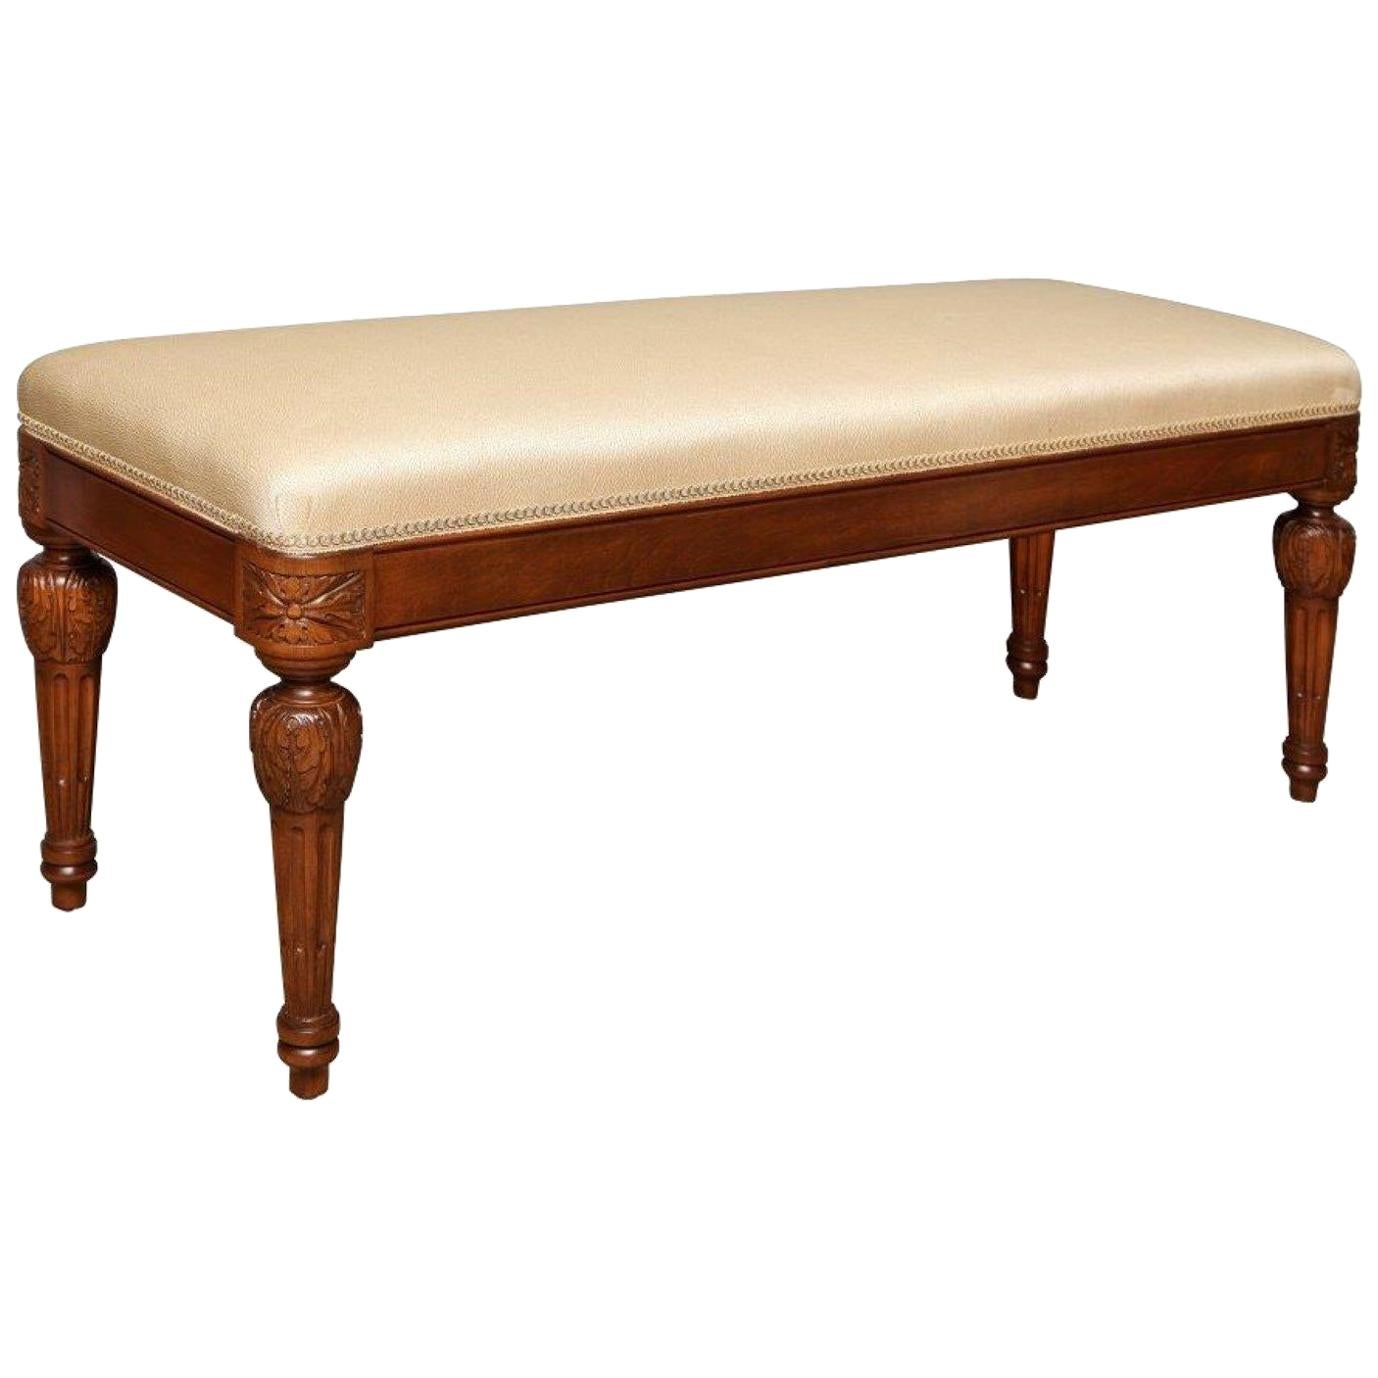 Daphne Bench by David Duncan, Louis XVI Style Bench with Maple Wood  For Sale